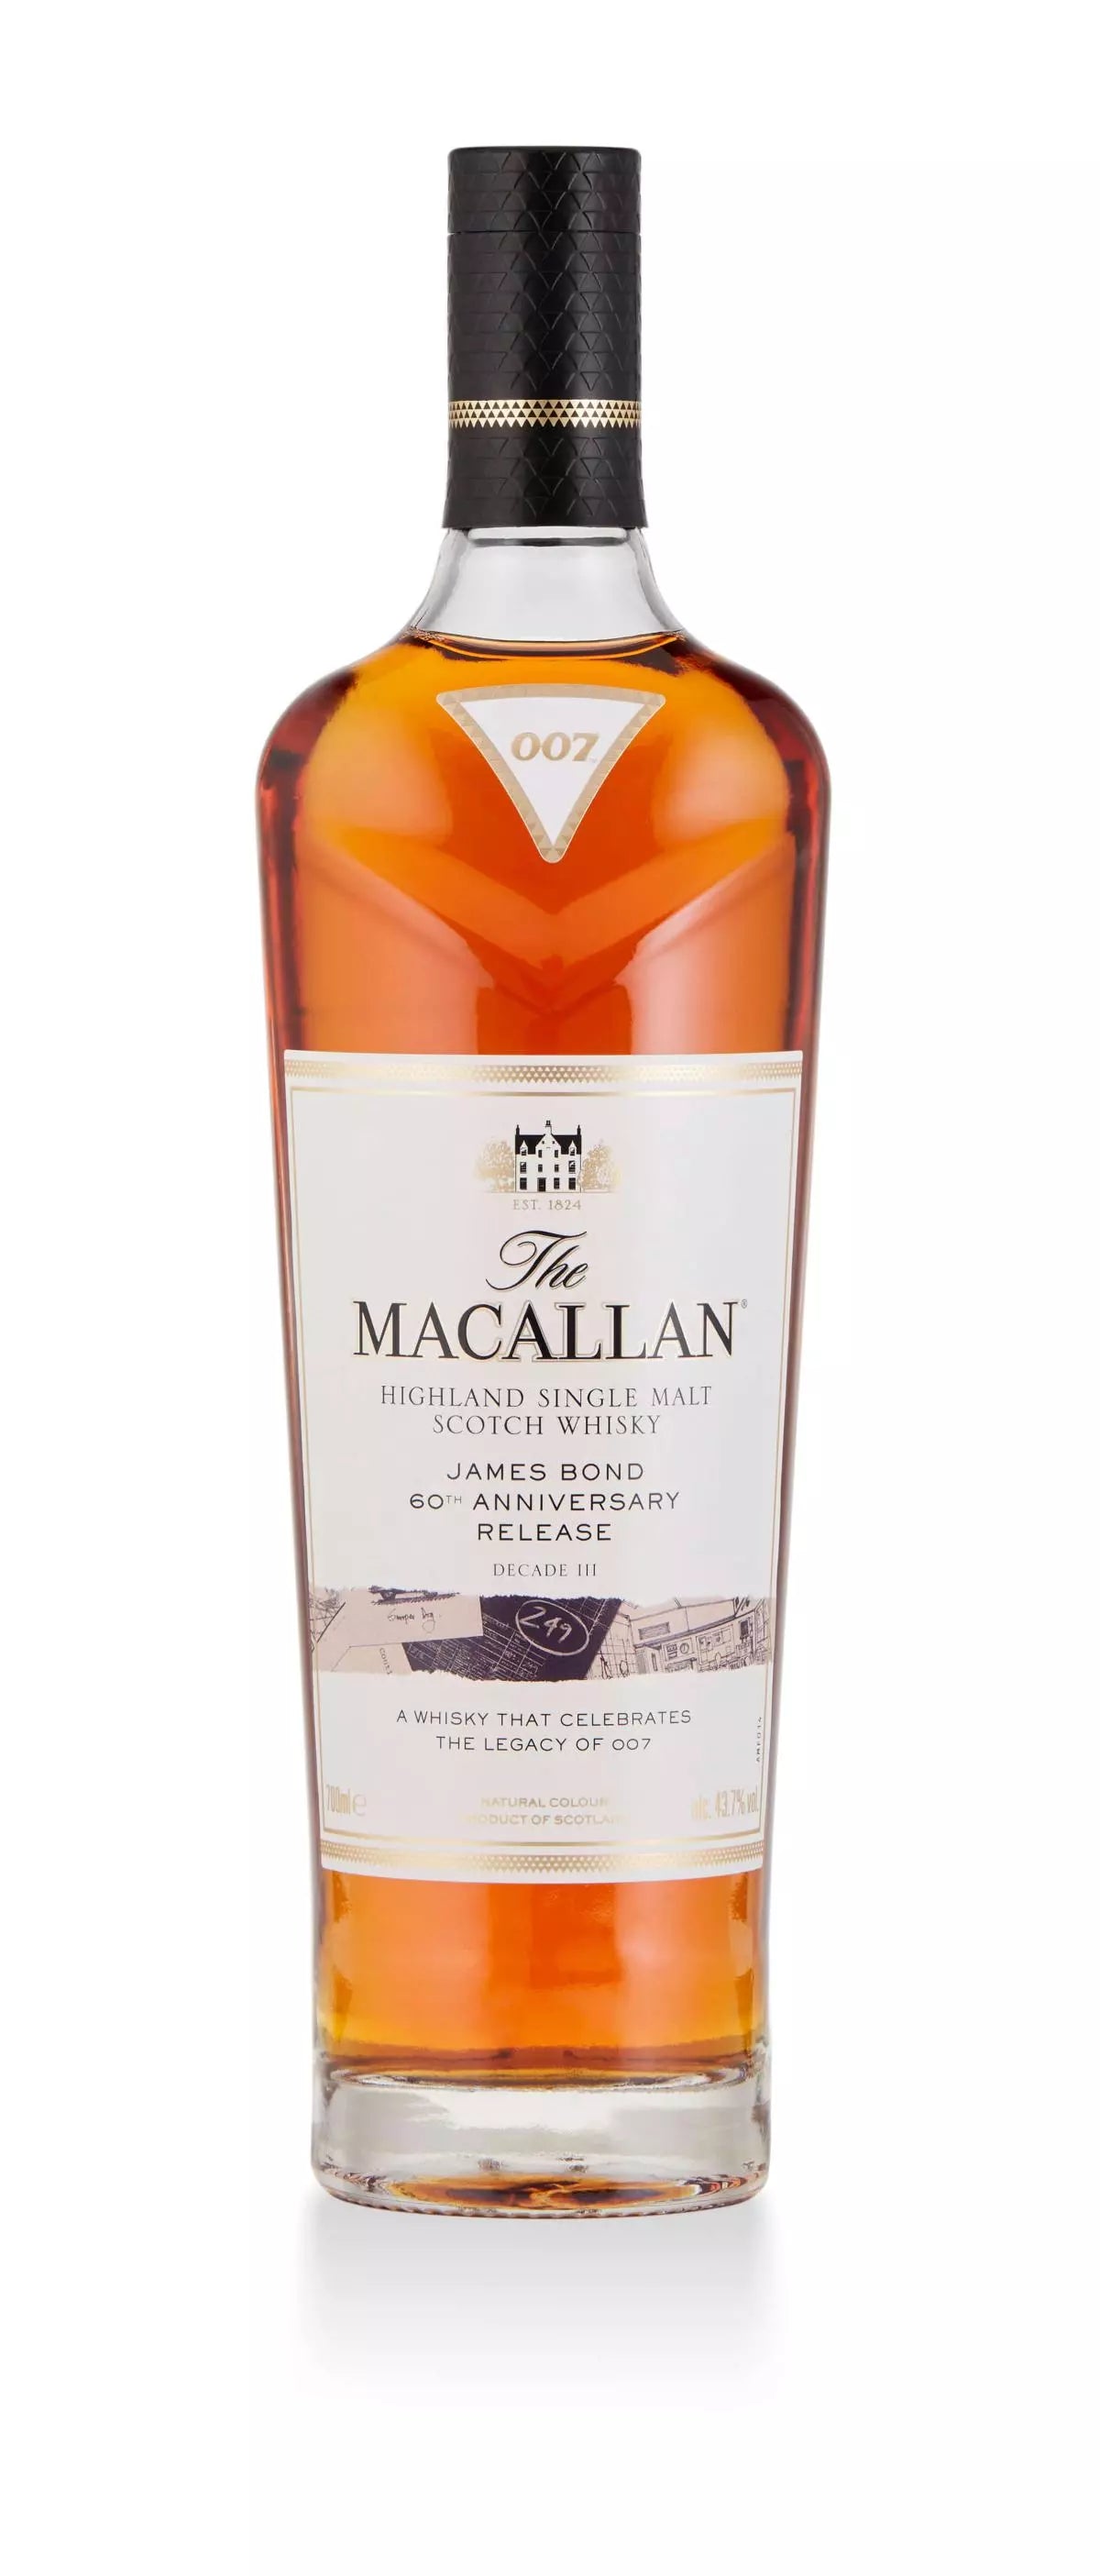 Macallan James Bond 60th Anniversary Release Decade III 700ml a tall clear glass bottle with a white label and black top